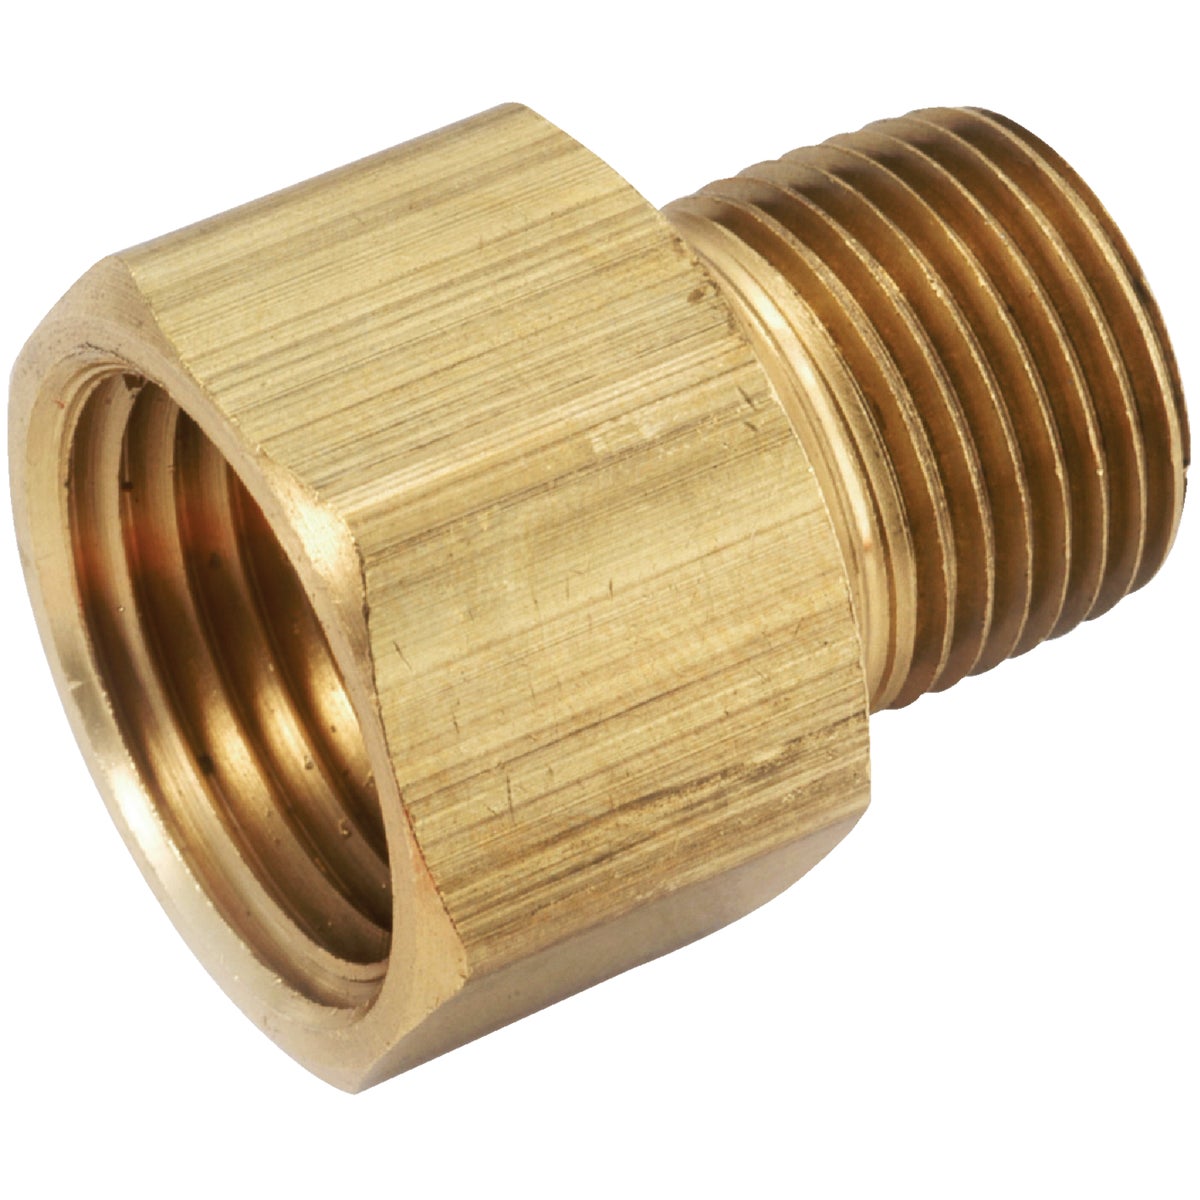 Anderson Metals 1/4 In. FPT x 1/8 In. MPT Brass Adapter